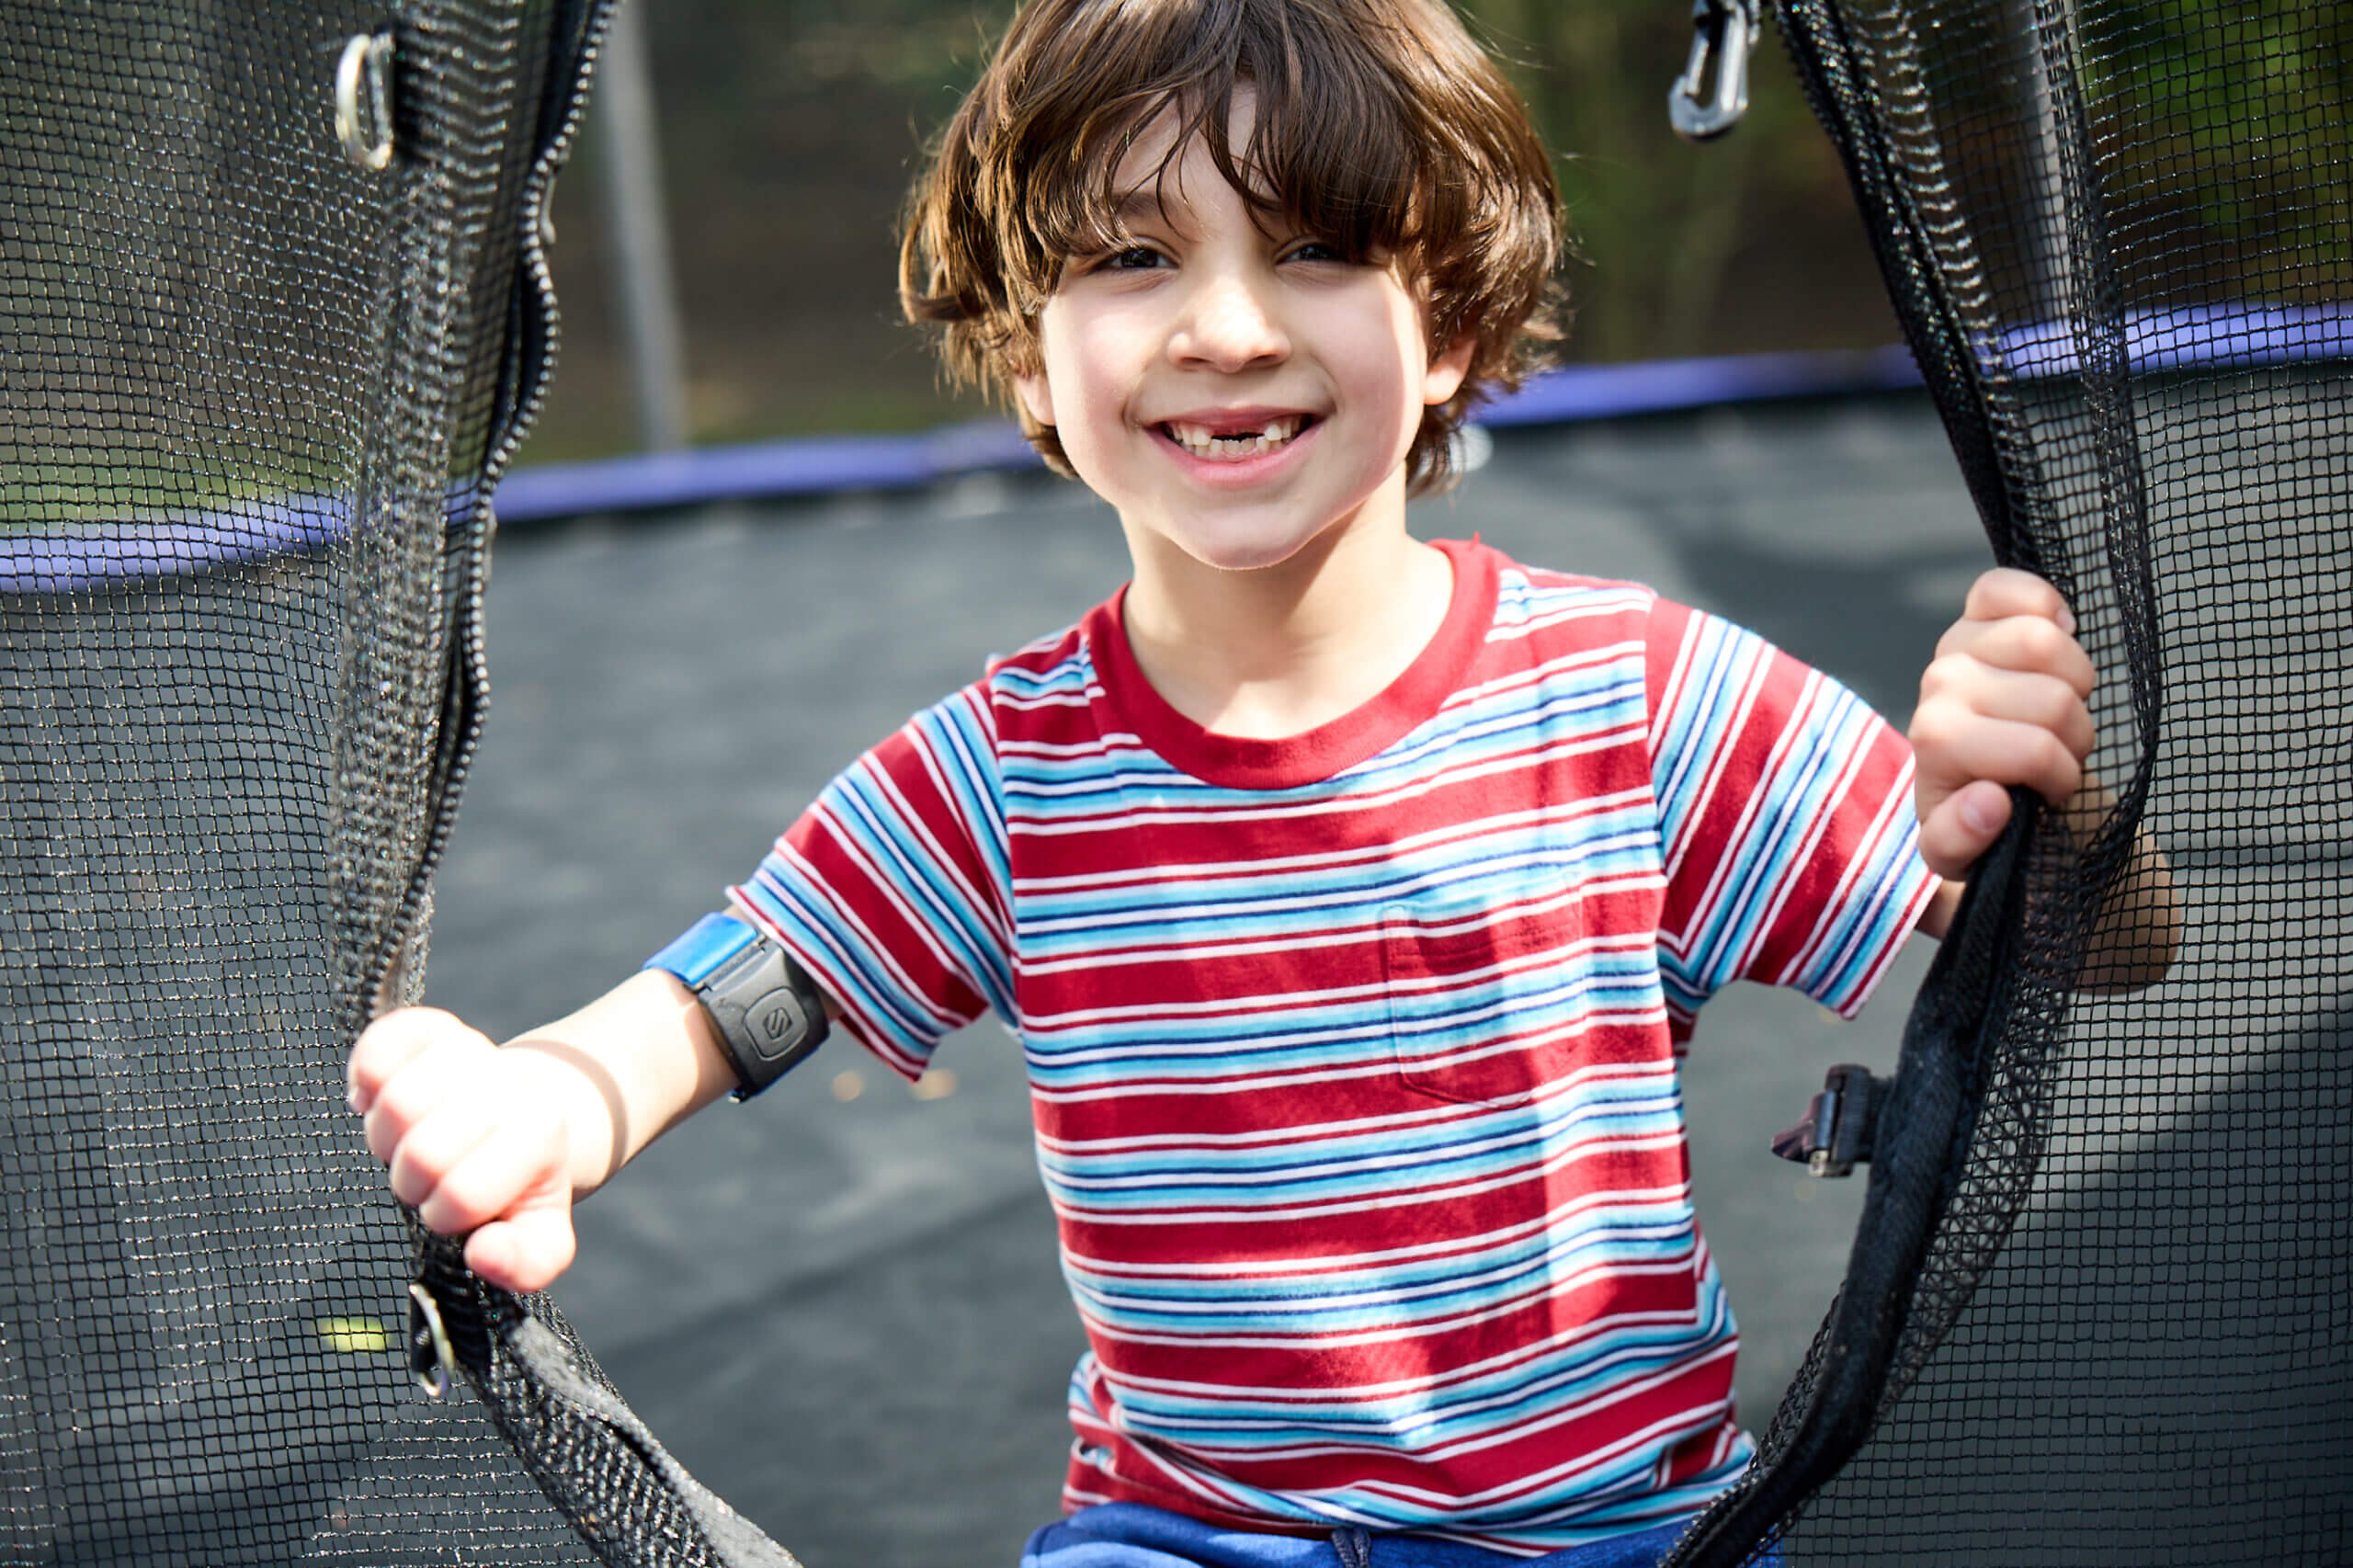 boy-smiling-on-trampoline-scaled